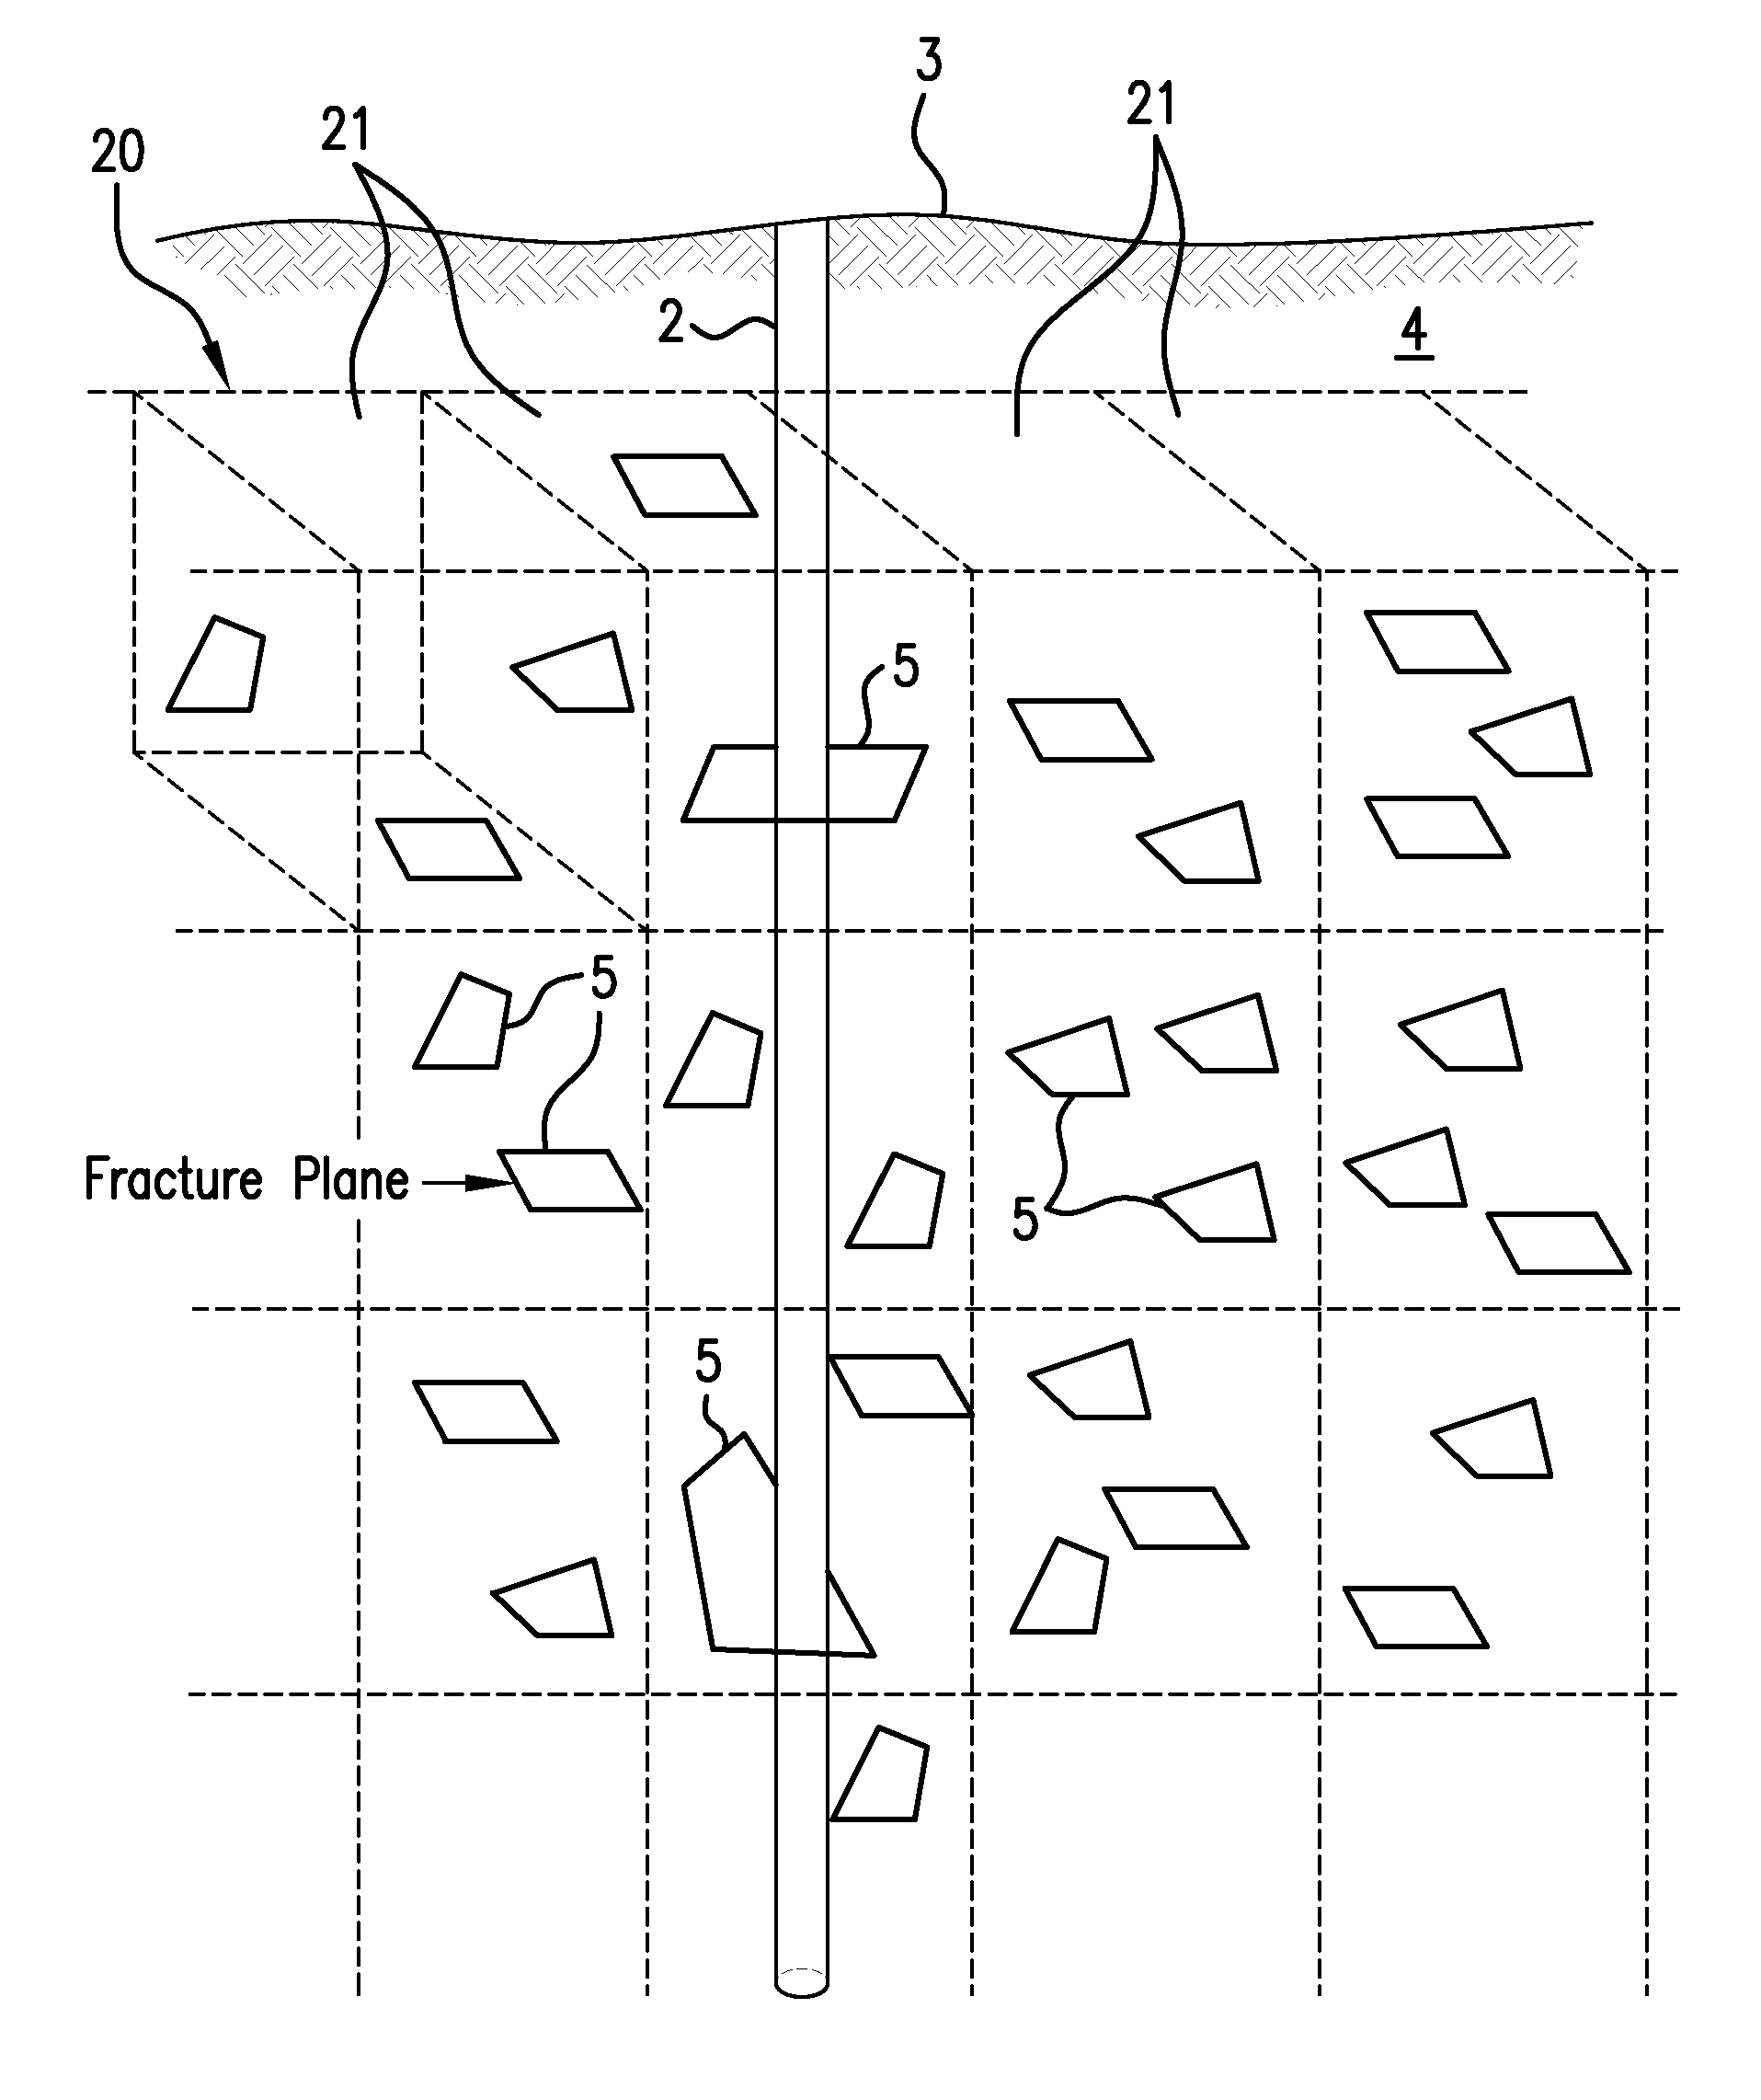 Method to improve reservoir simulation and recovery from fractured reservoirs